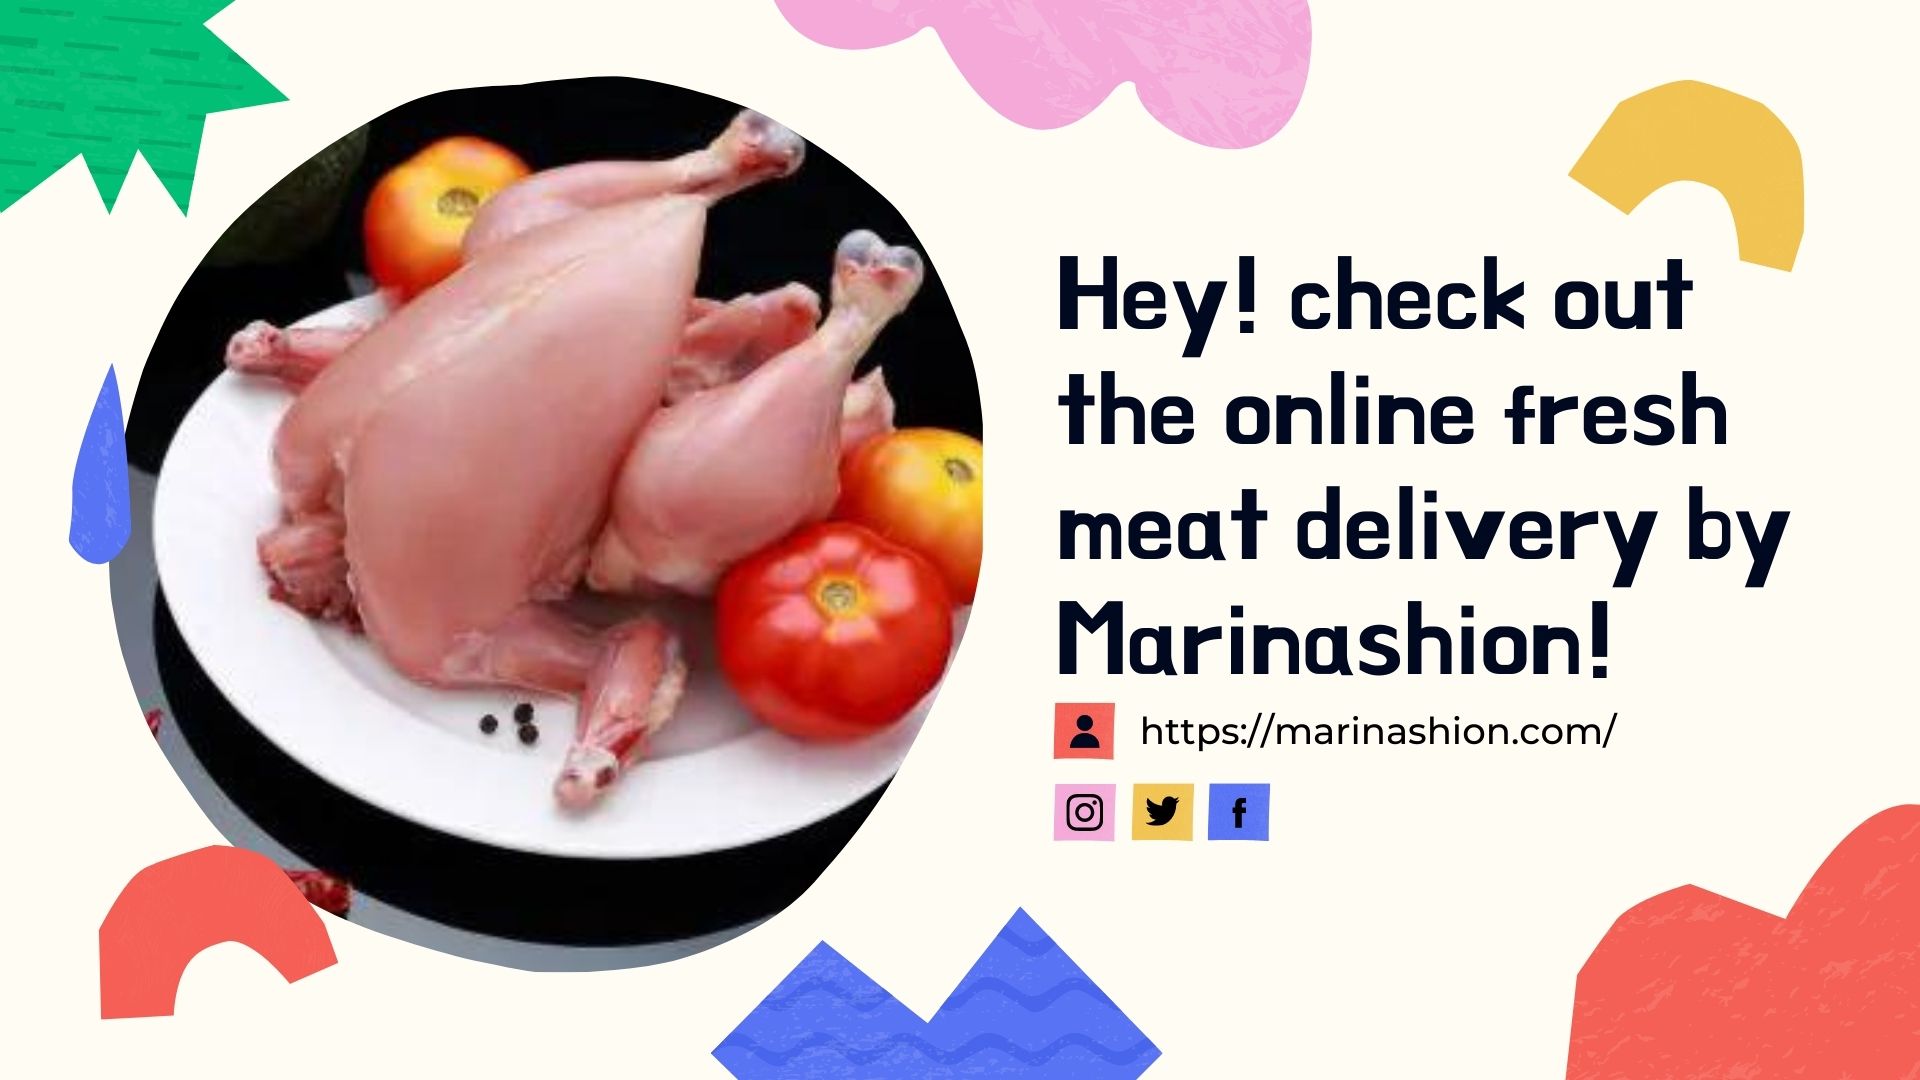 Hey! check out the online fresh meat delivery by Marinashion!